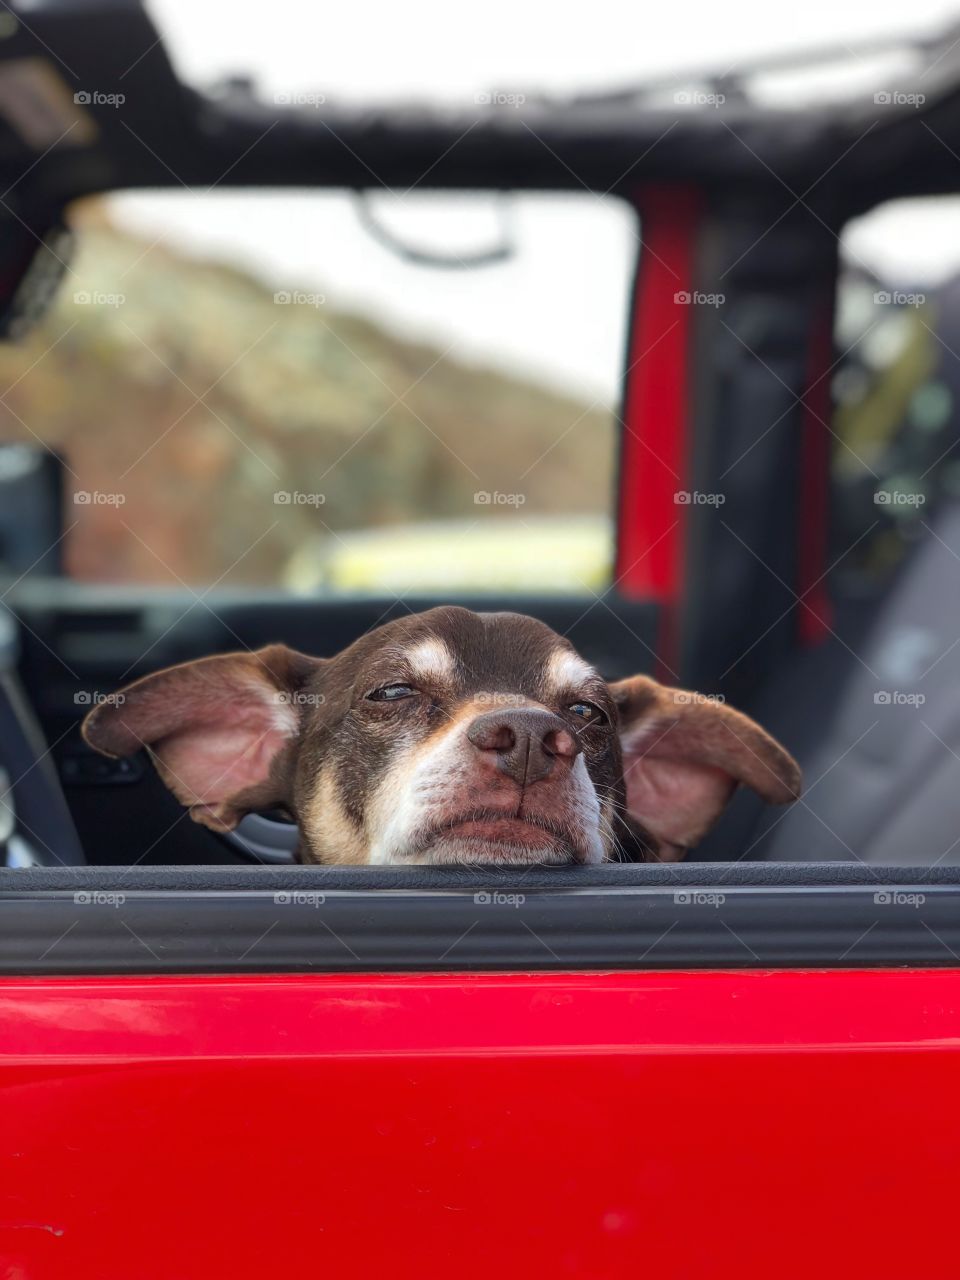 Little dog face looking out open car window